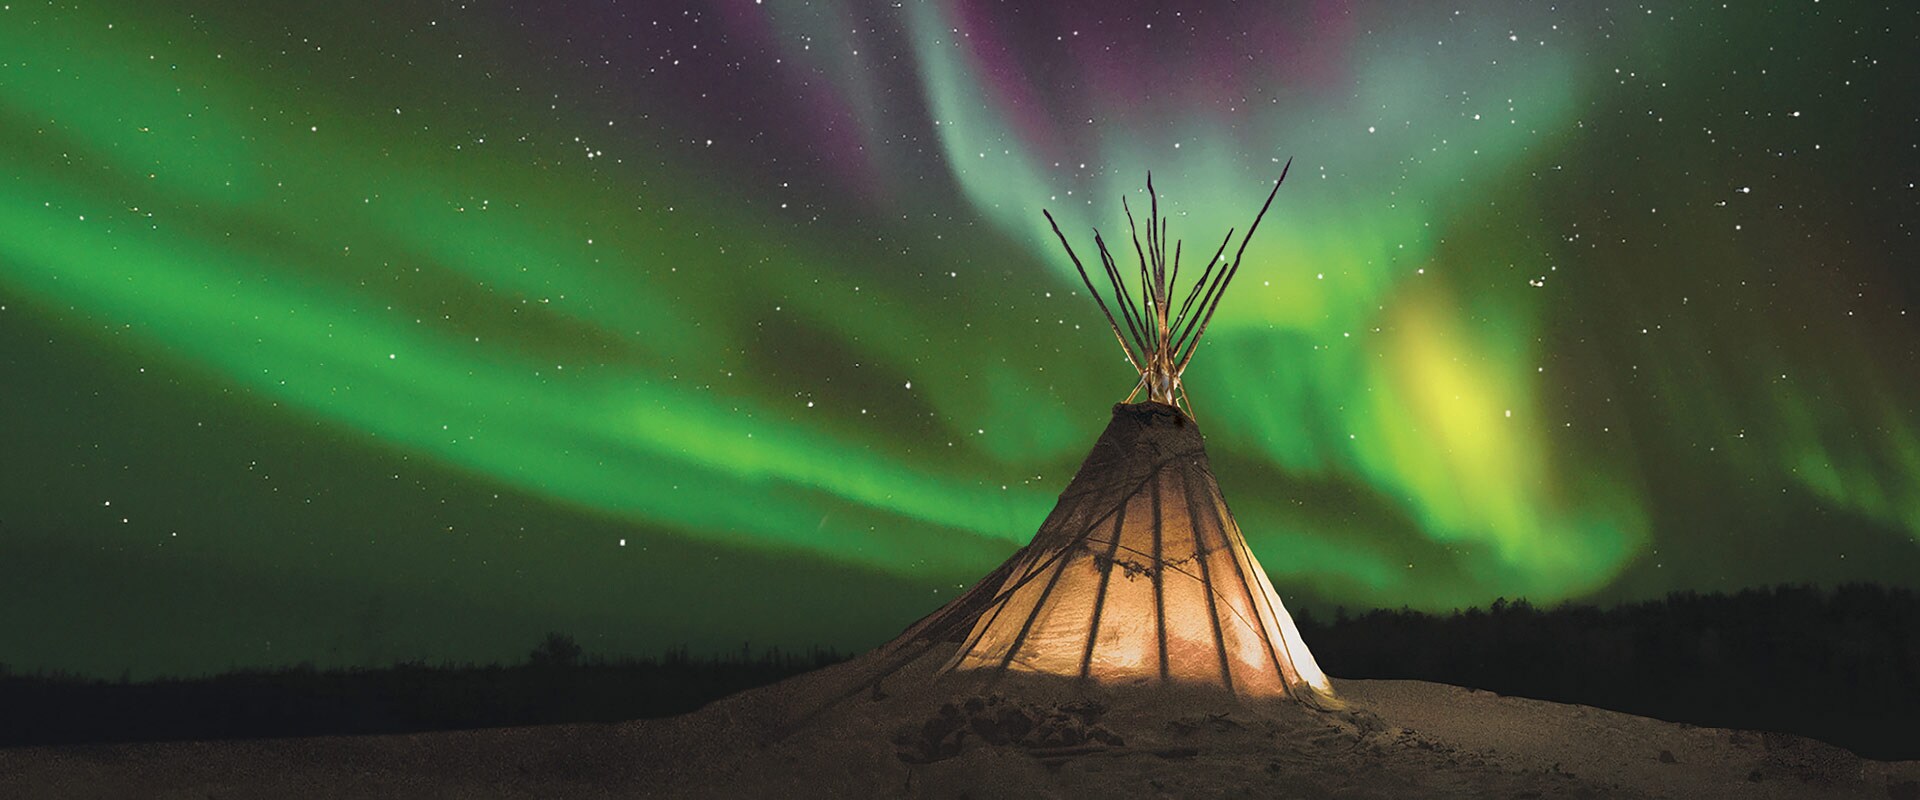 Teepee lit up under the Northern Lights